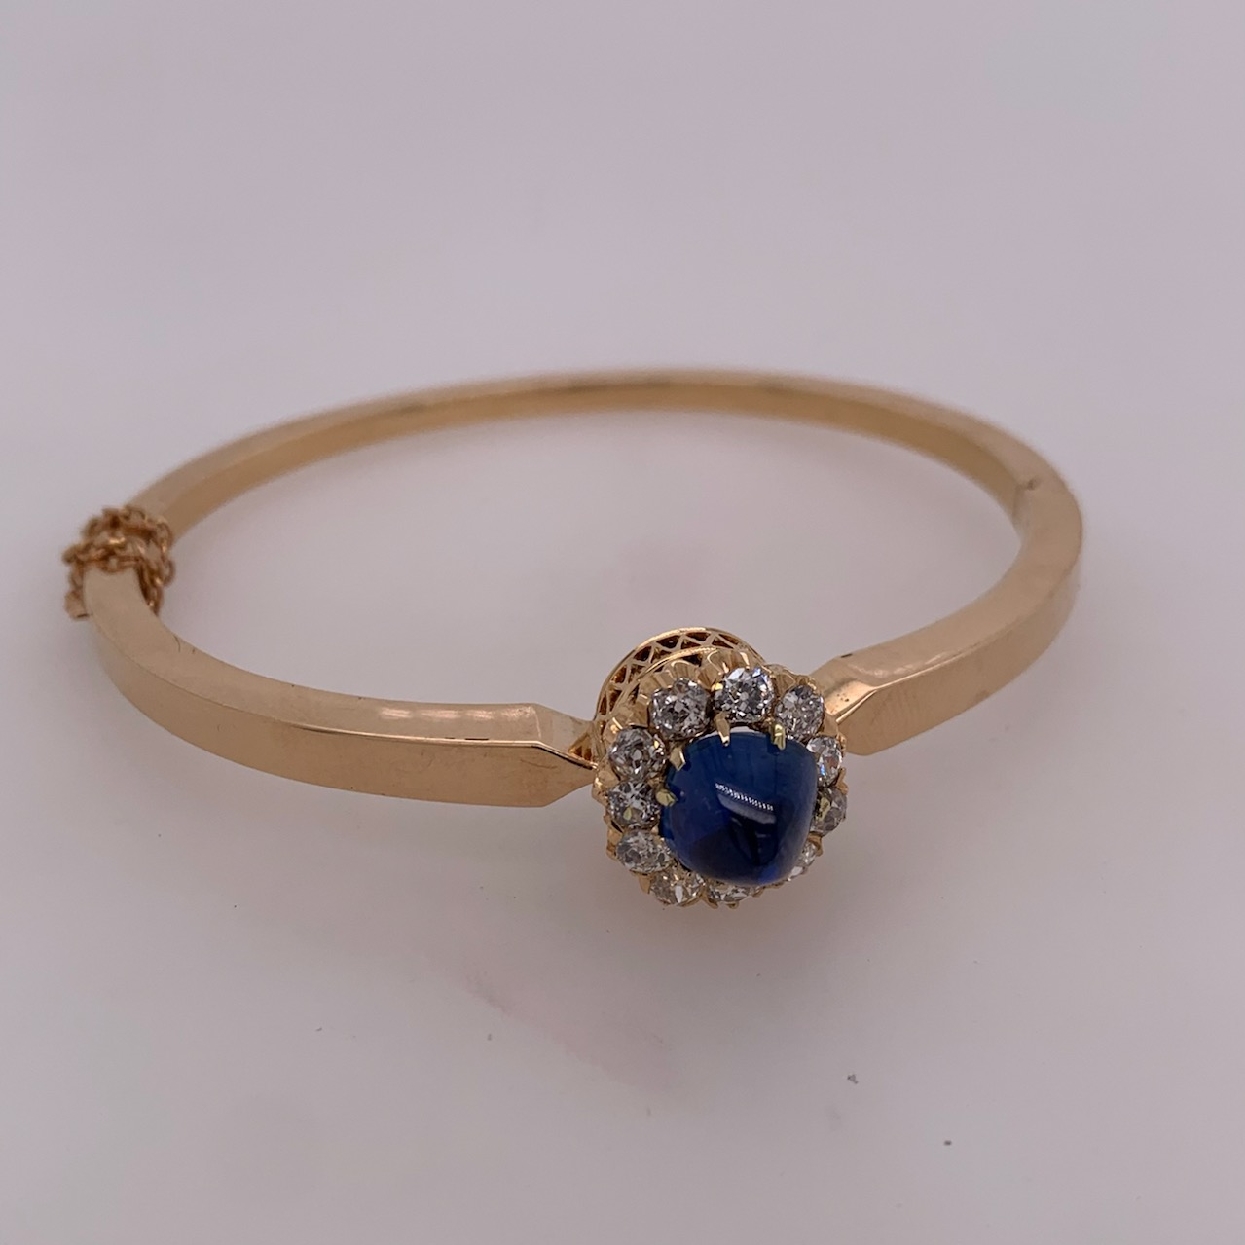 14k Rose Gold Bangle With 4.12CT Blue Un-Heated Cabochon Cut Blue Sapphire with Old Mine Cut Diamond Halo

Comes With Gemological Report